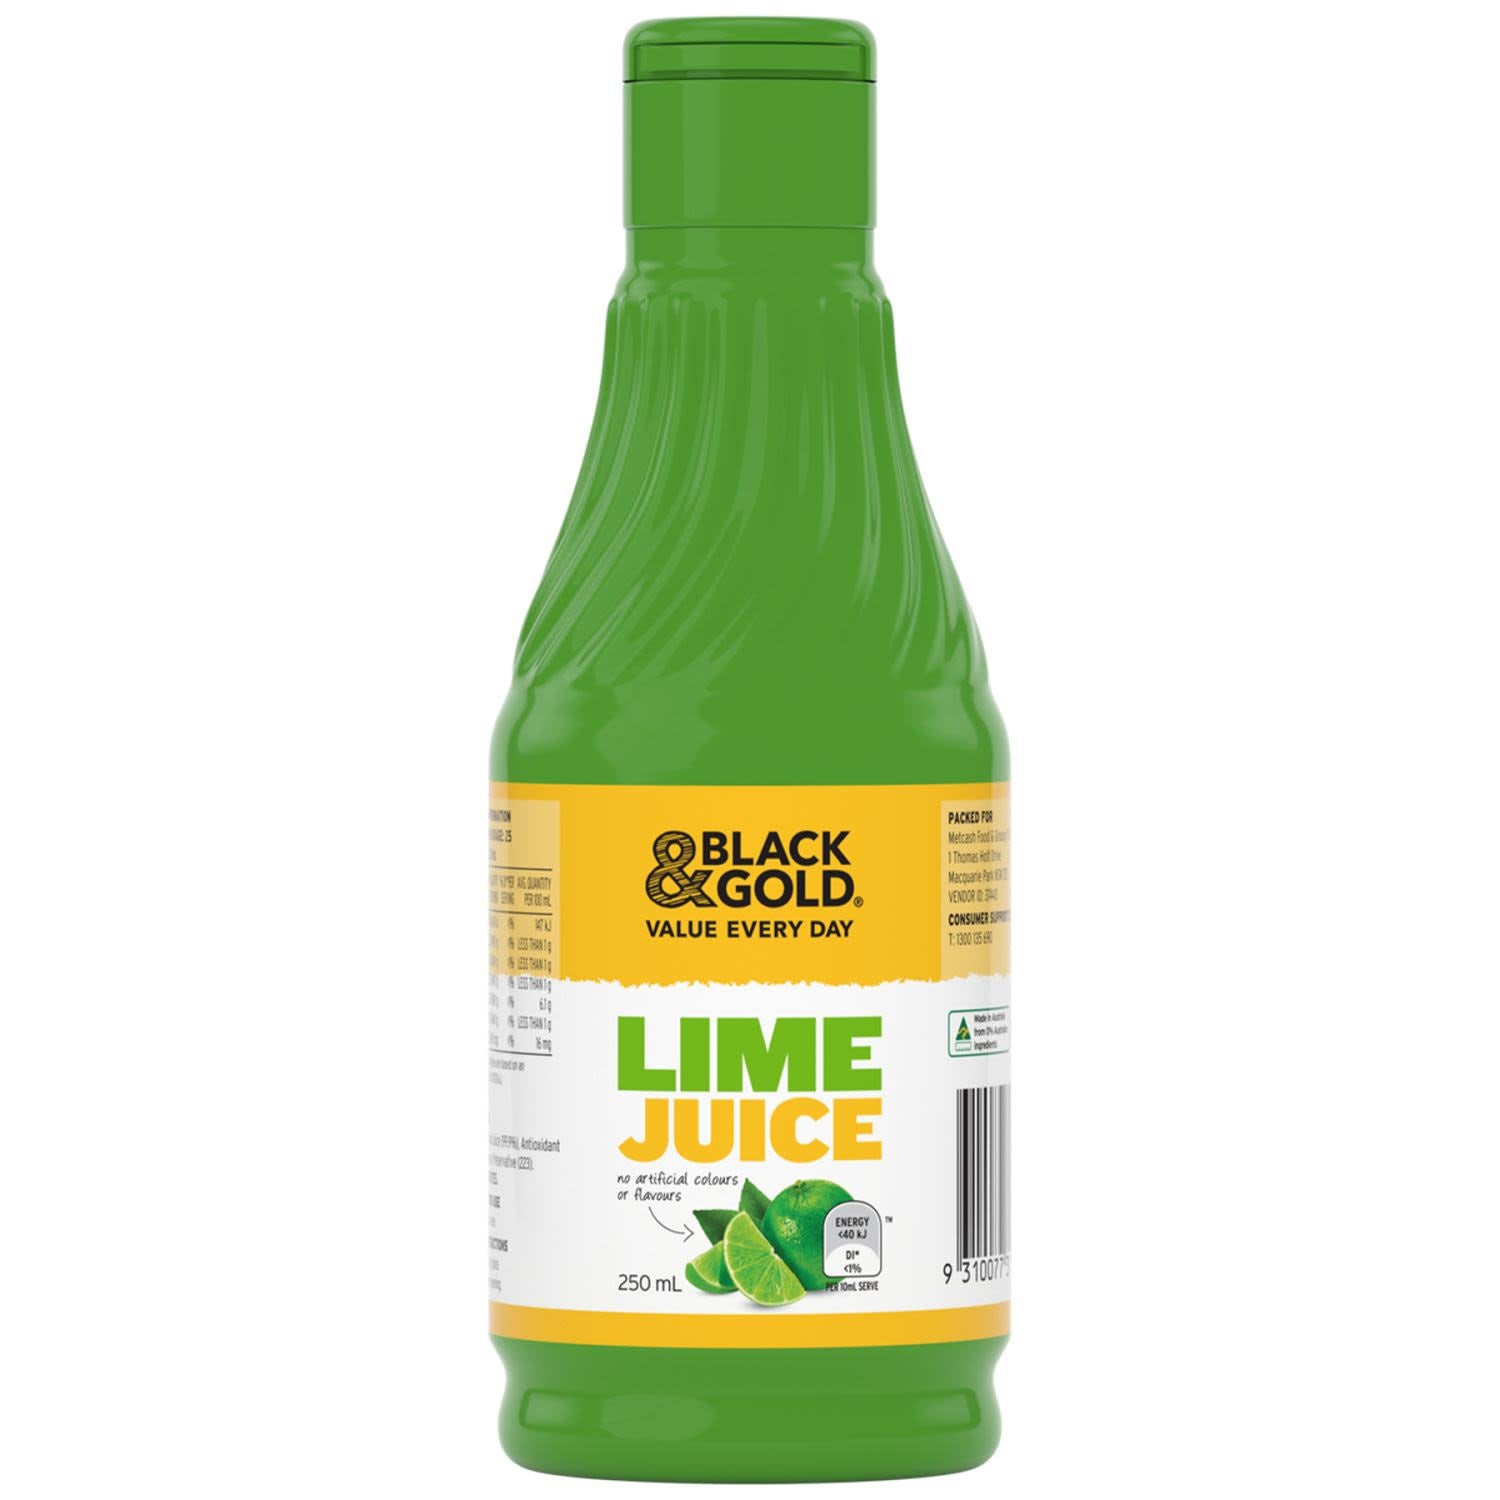 Black and Gold Lime Juice 250ml